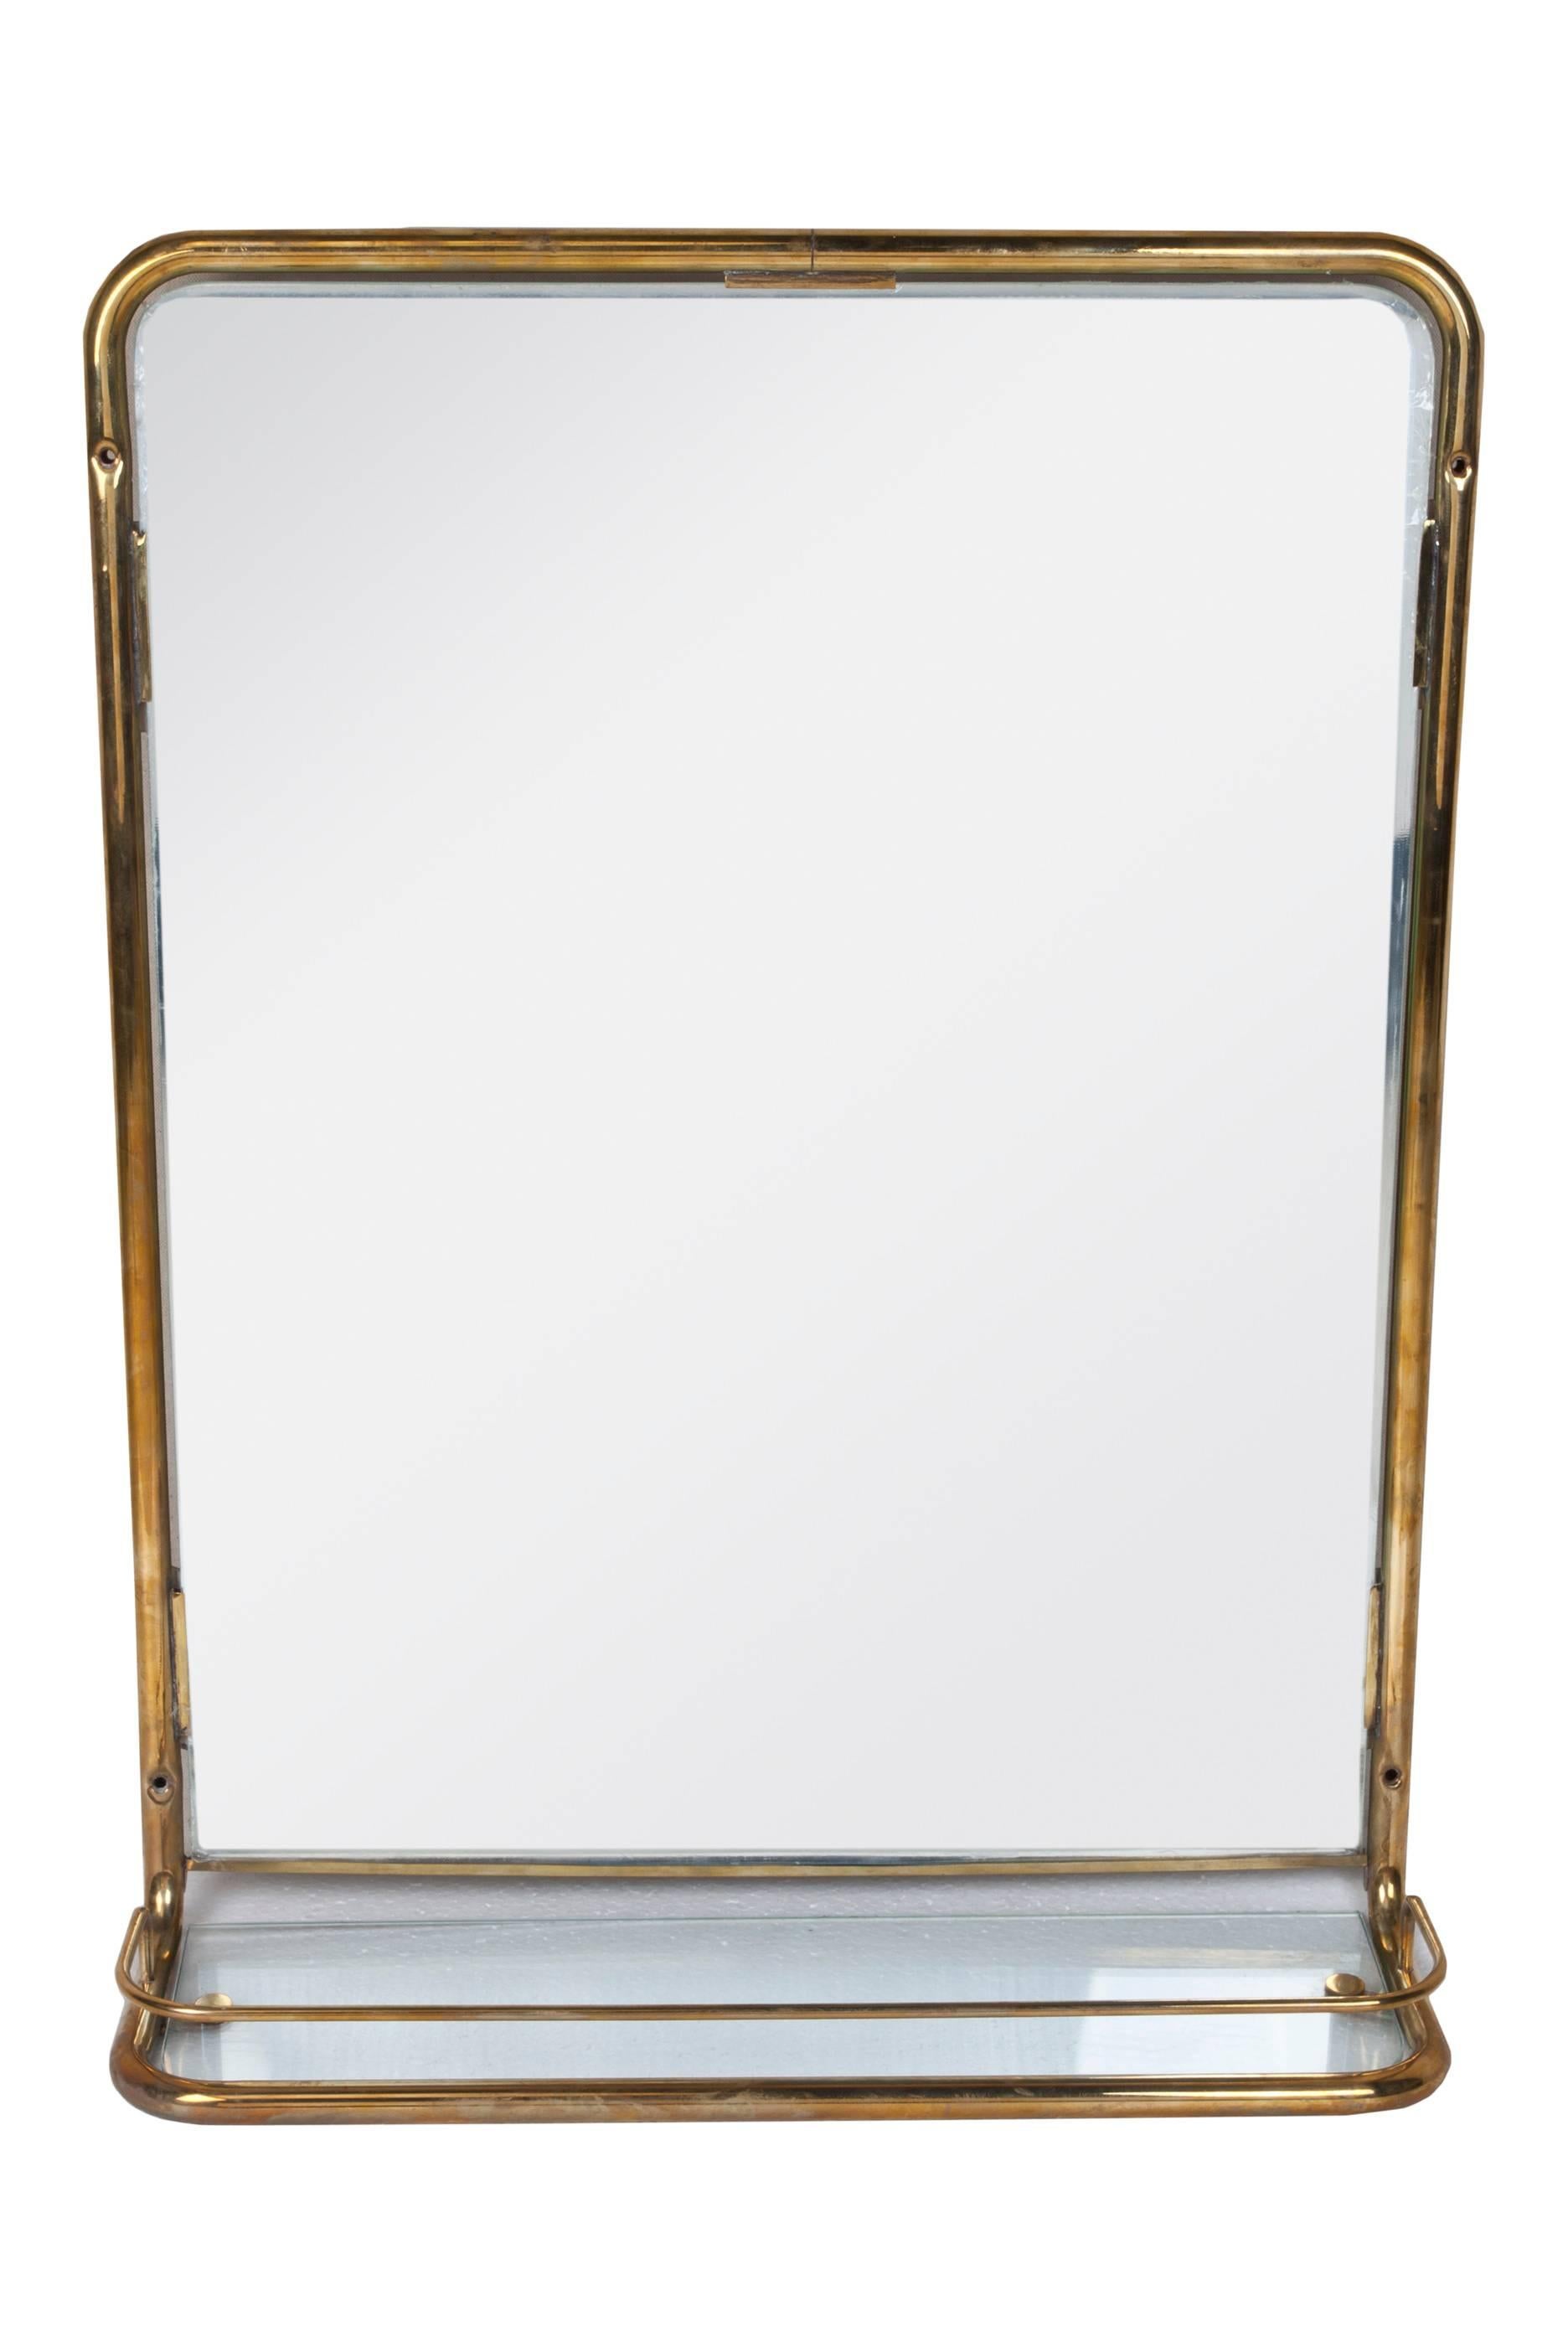 Industrial Unusual Brass Mirror from a Ship's Stateroom, circa 1960s